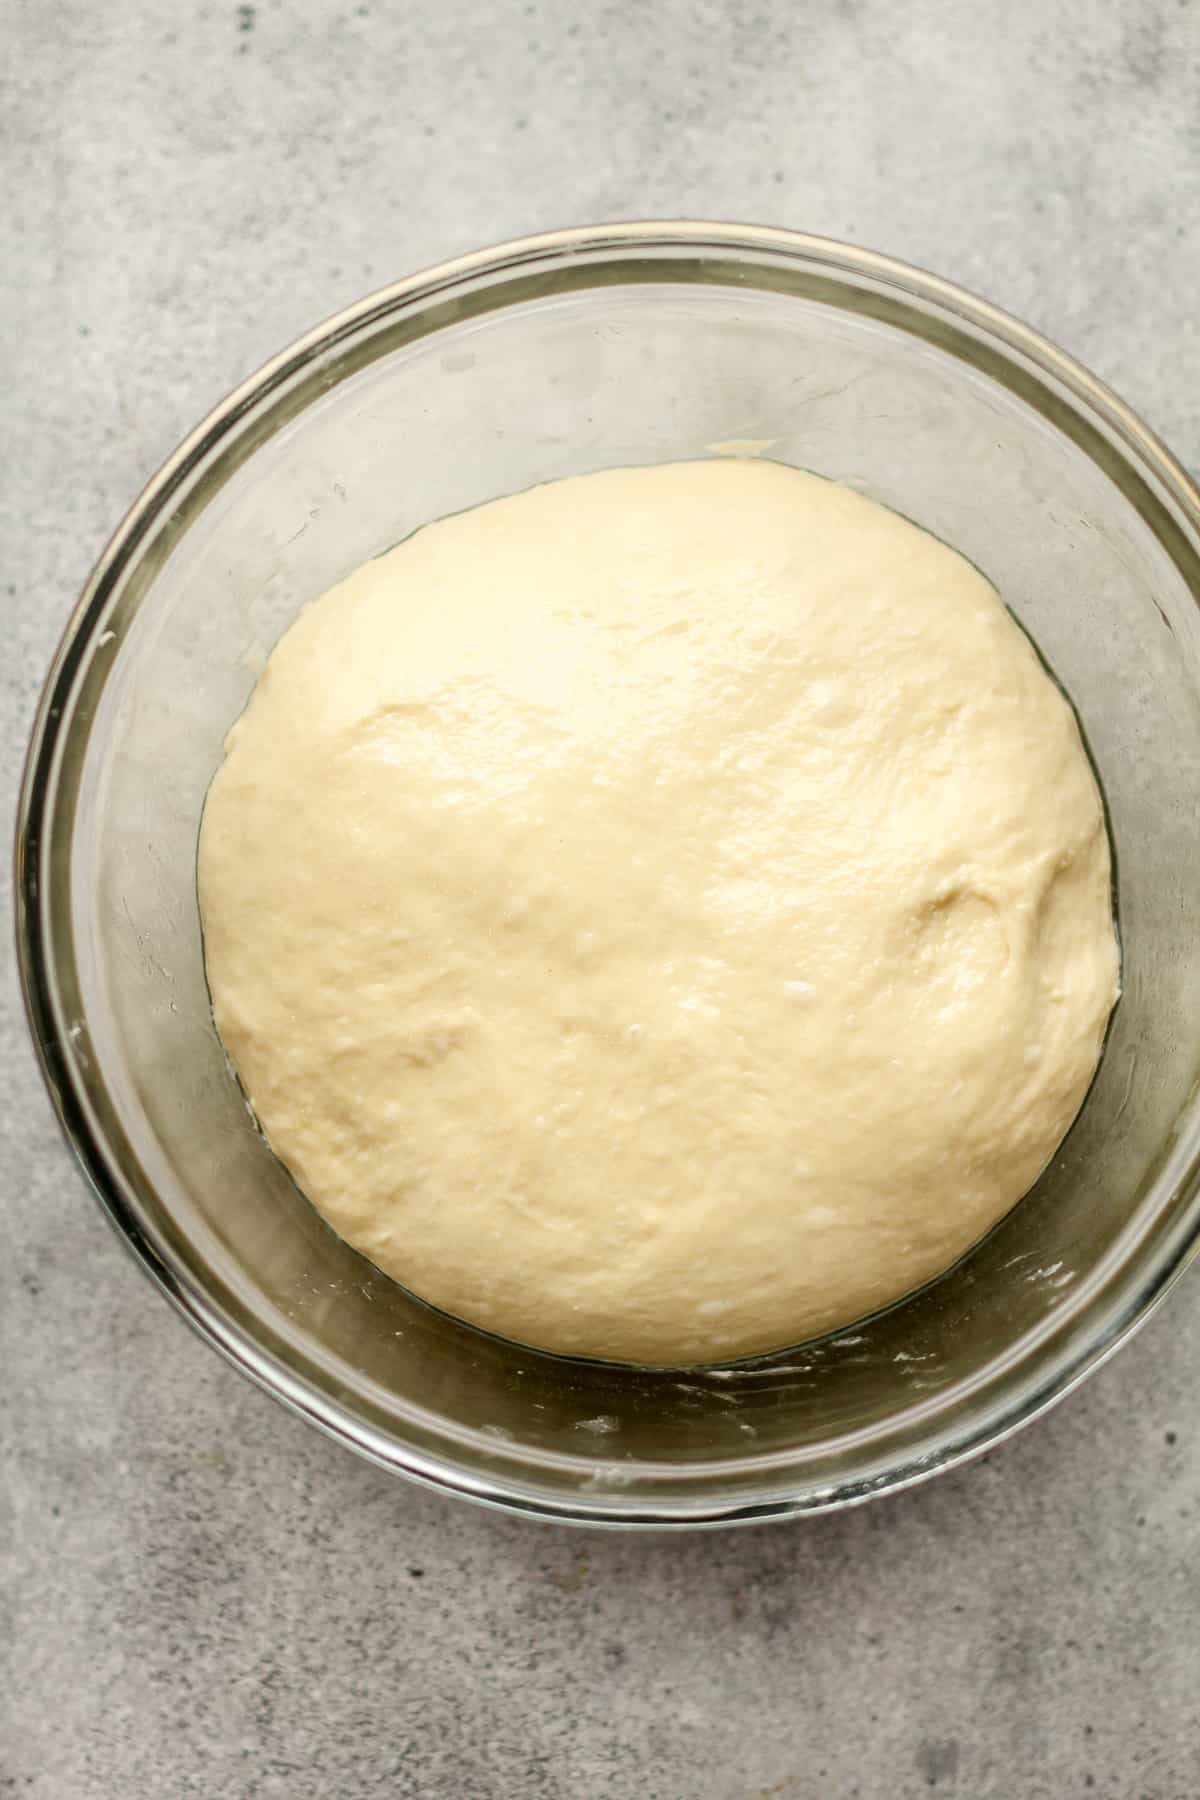 The dough in the bowl.